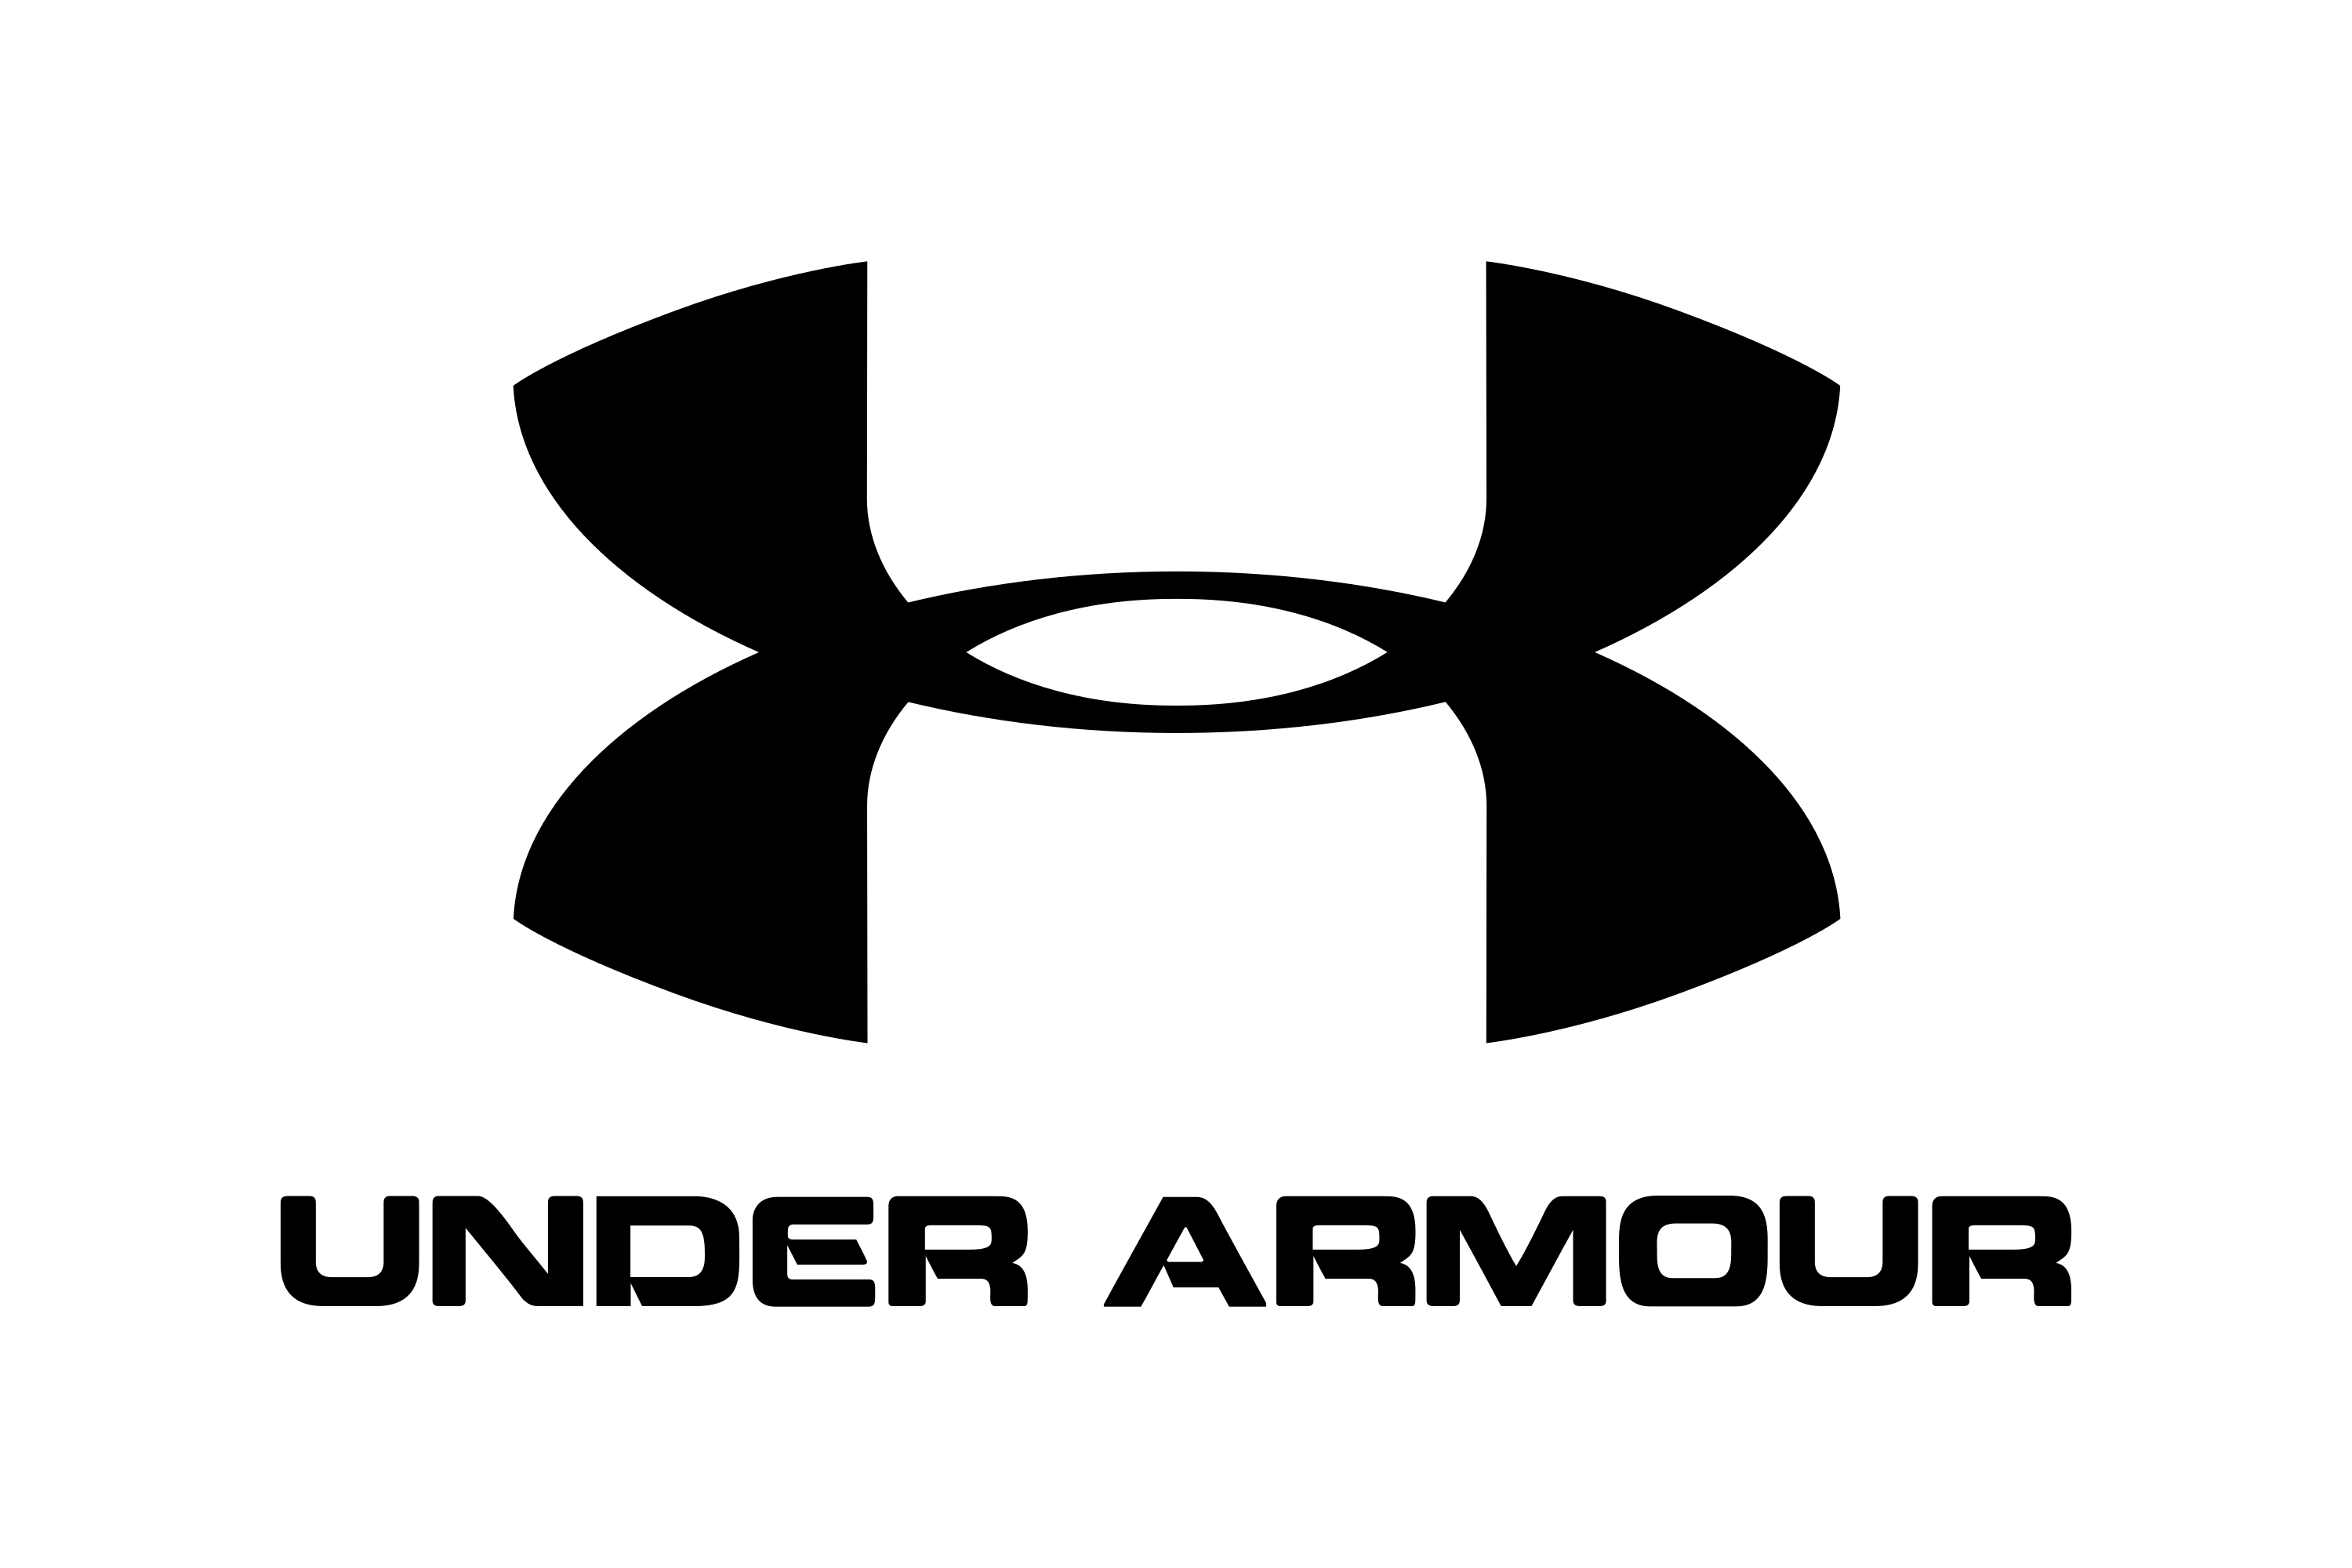 Download Under Armour Logo in SVG Vector or PNG File Format - Logo.wine